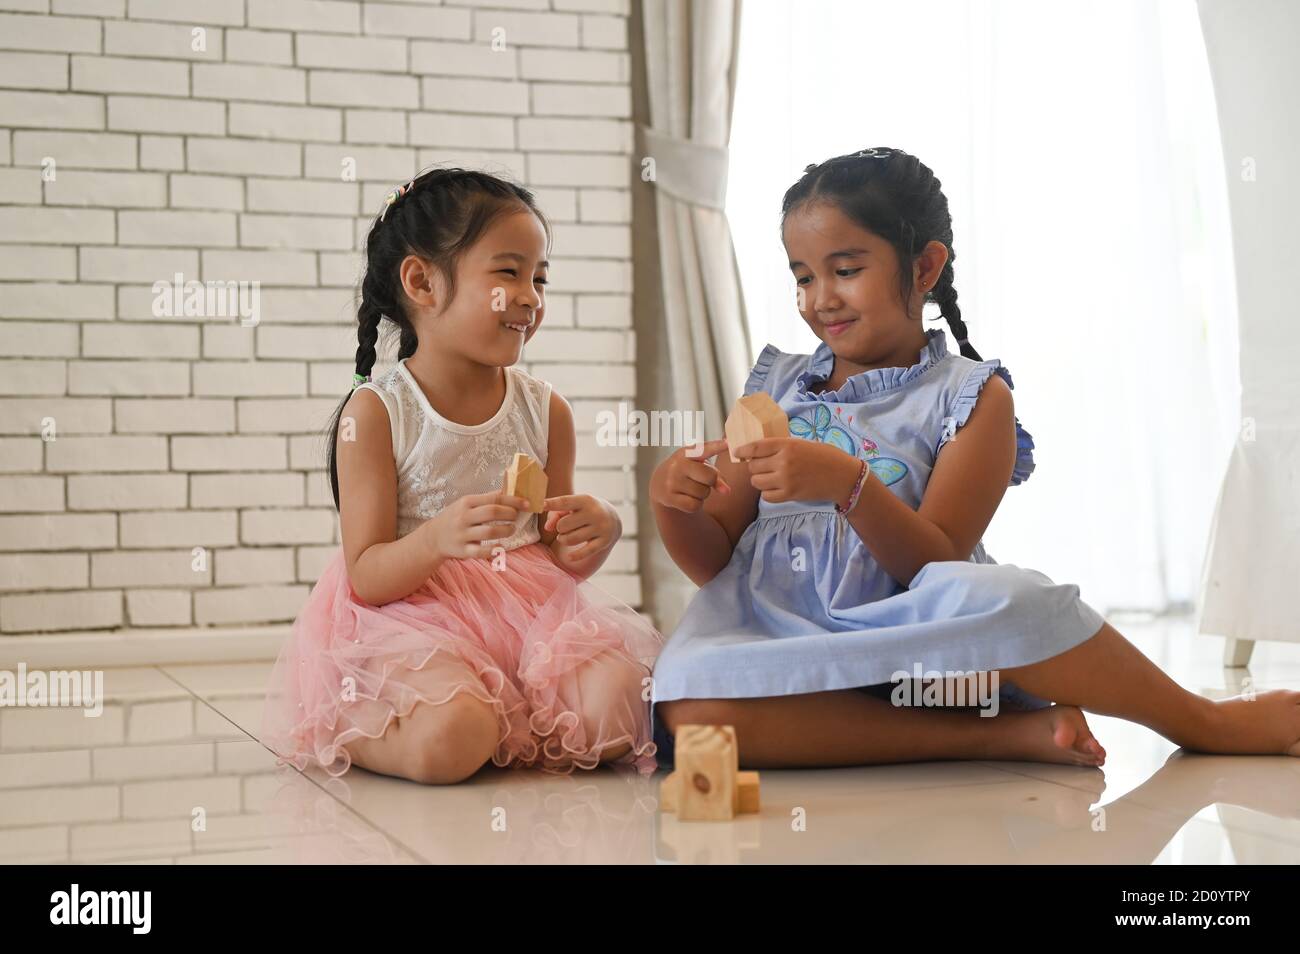 Two children with toy blocks at home or daycare. Stock Photo